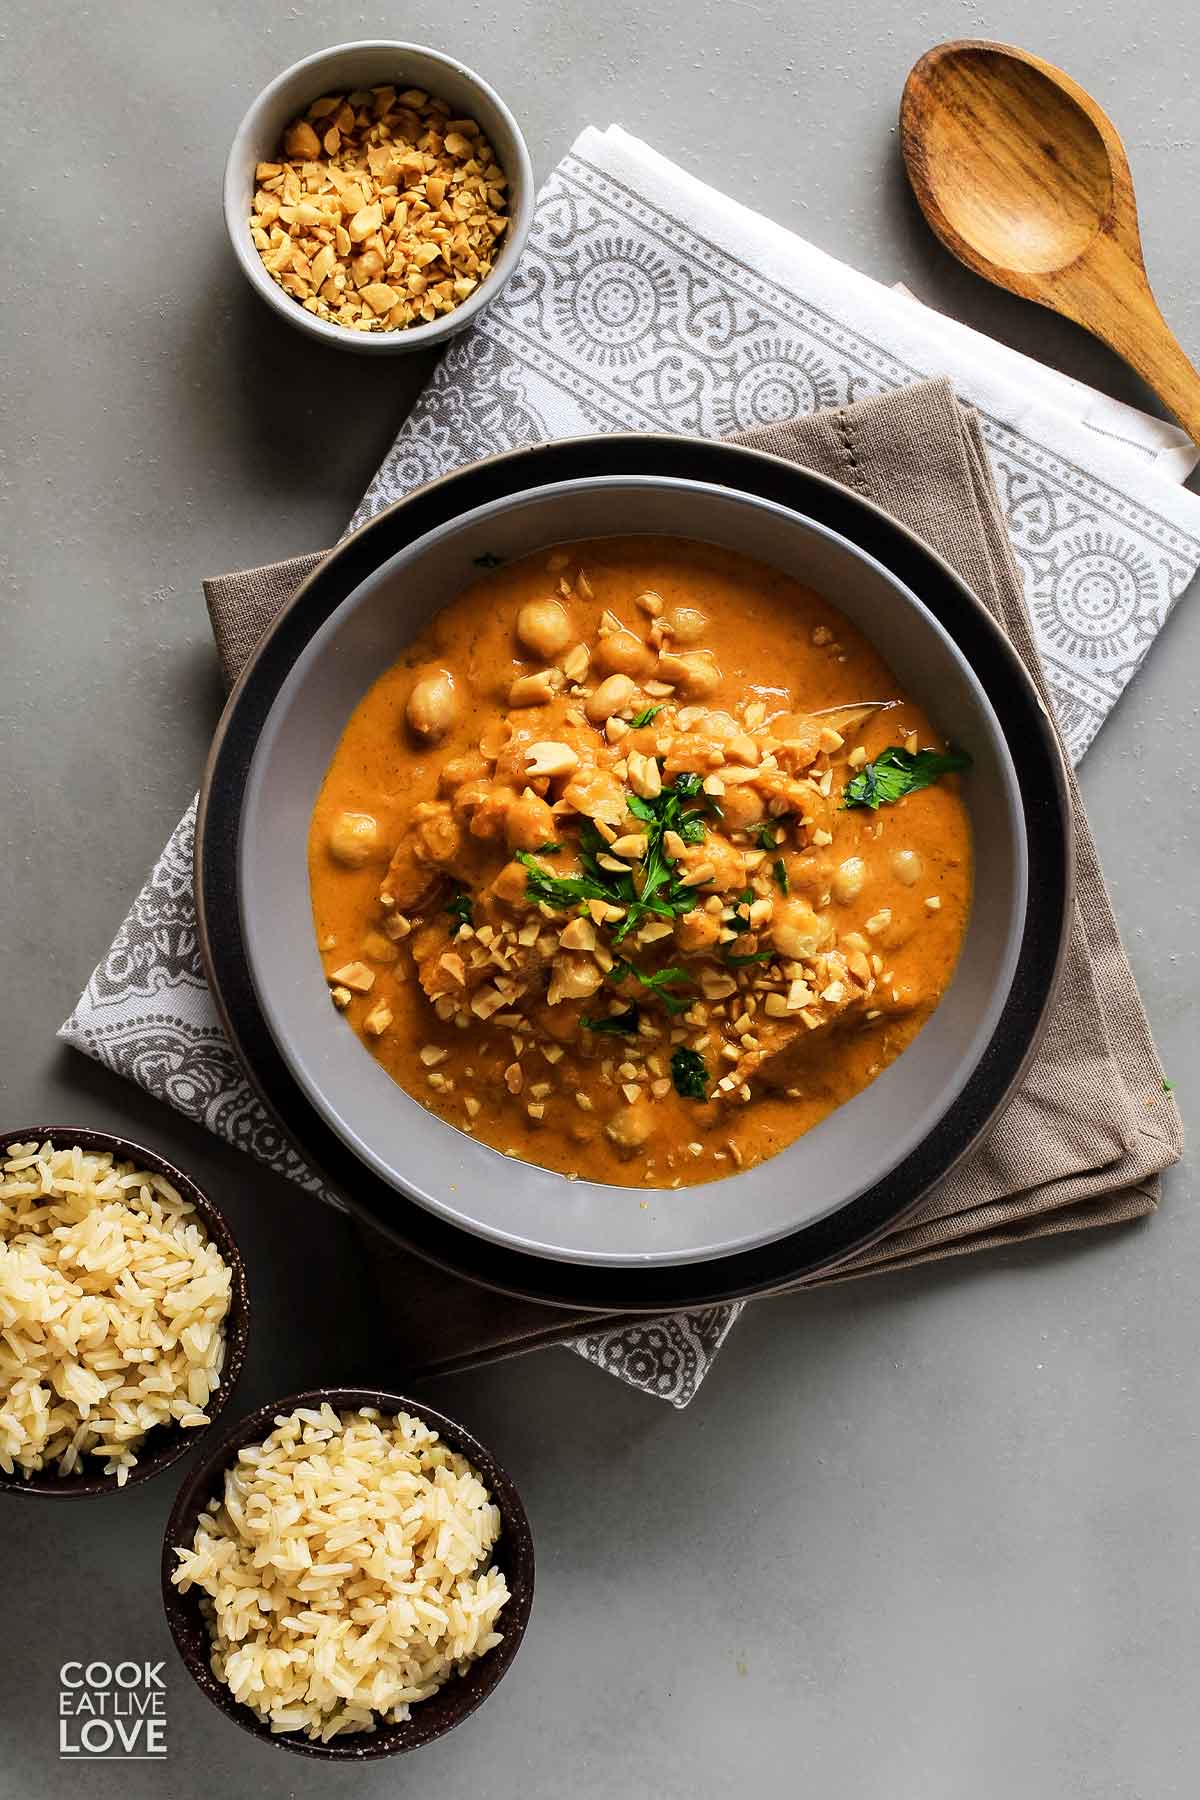 Vegan massaman curry in bowl with chopped peanuts and small bowls of brown rice.